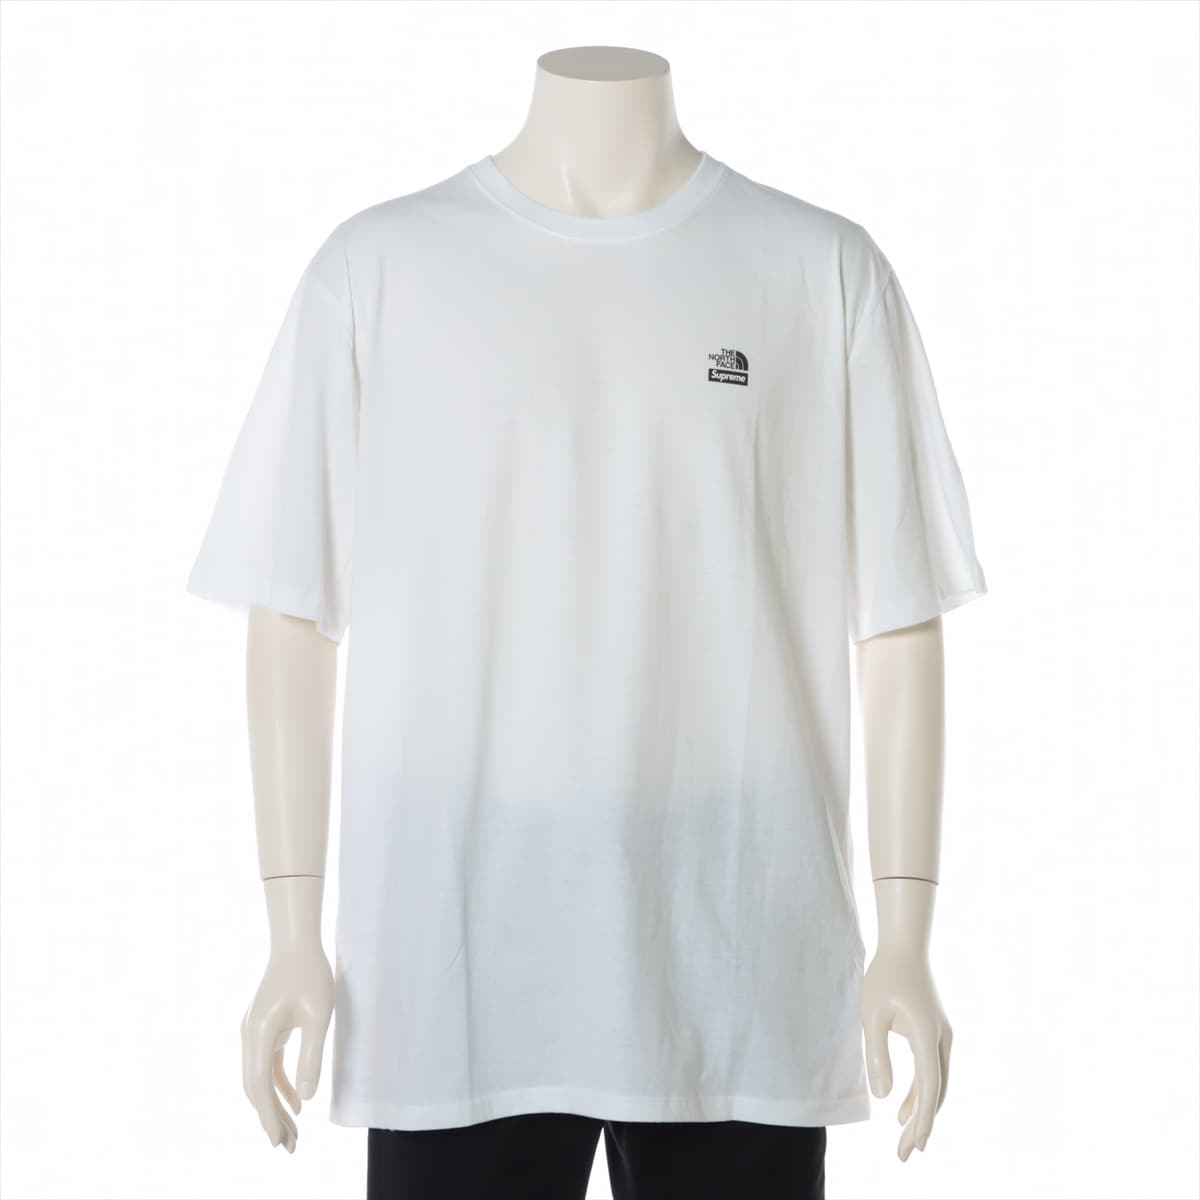 SUPREME × THE NORTH FACE 21AW Cotton T-shirt L Men's White  MOUNTAIN TEE NT52101I